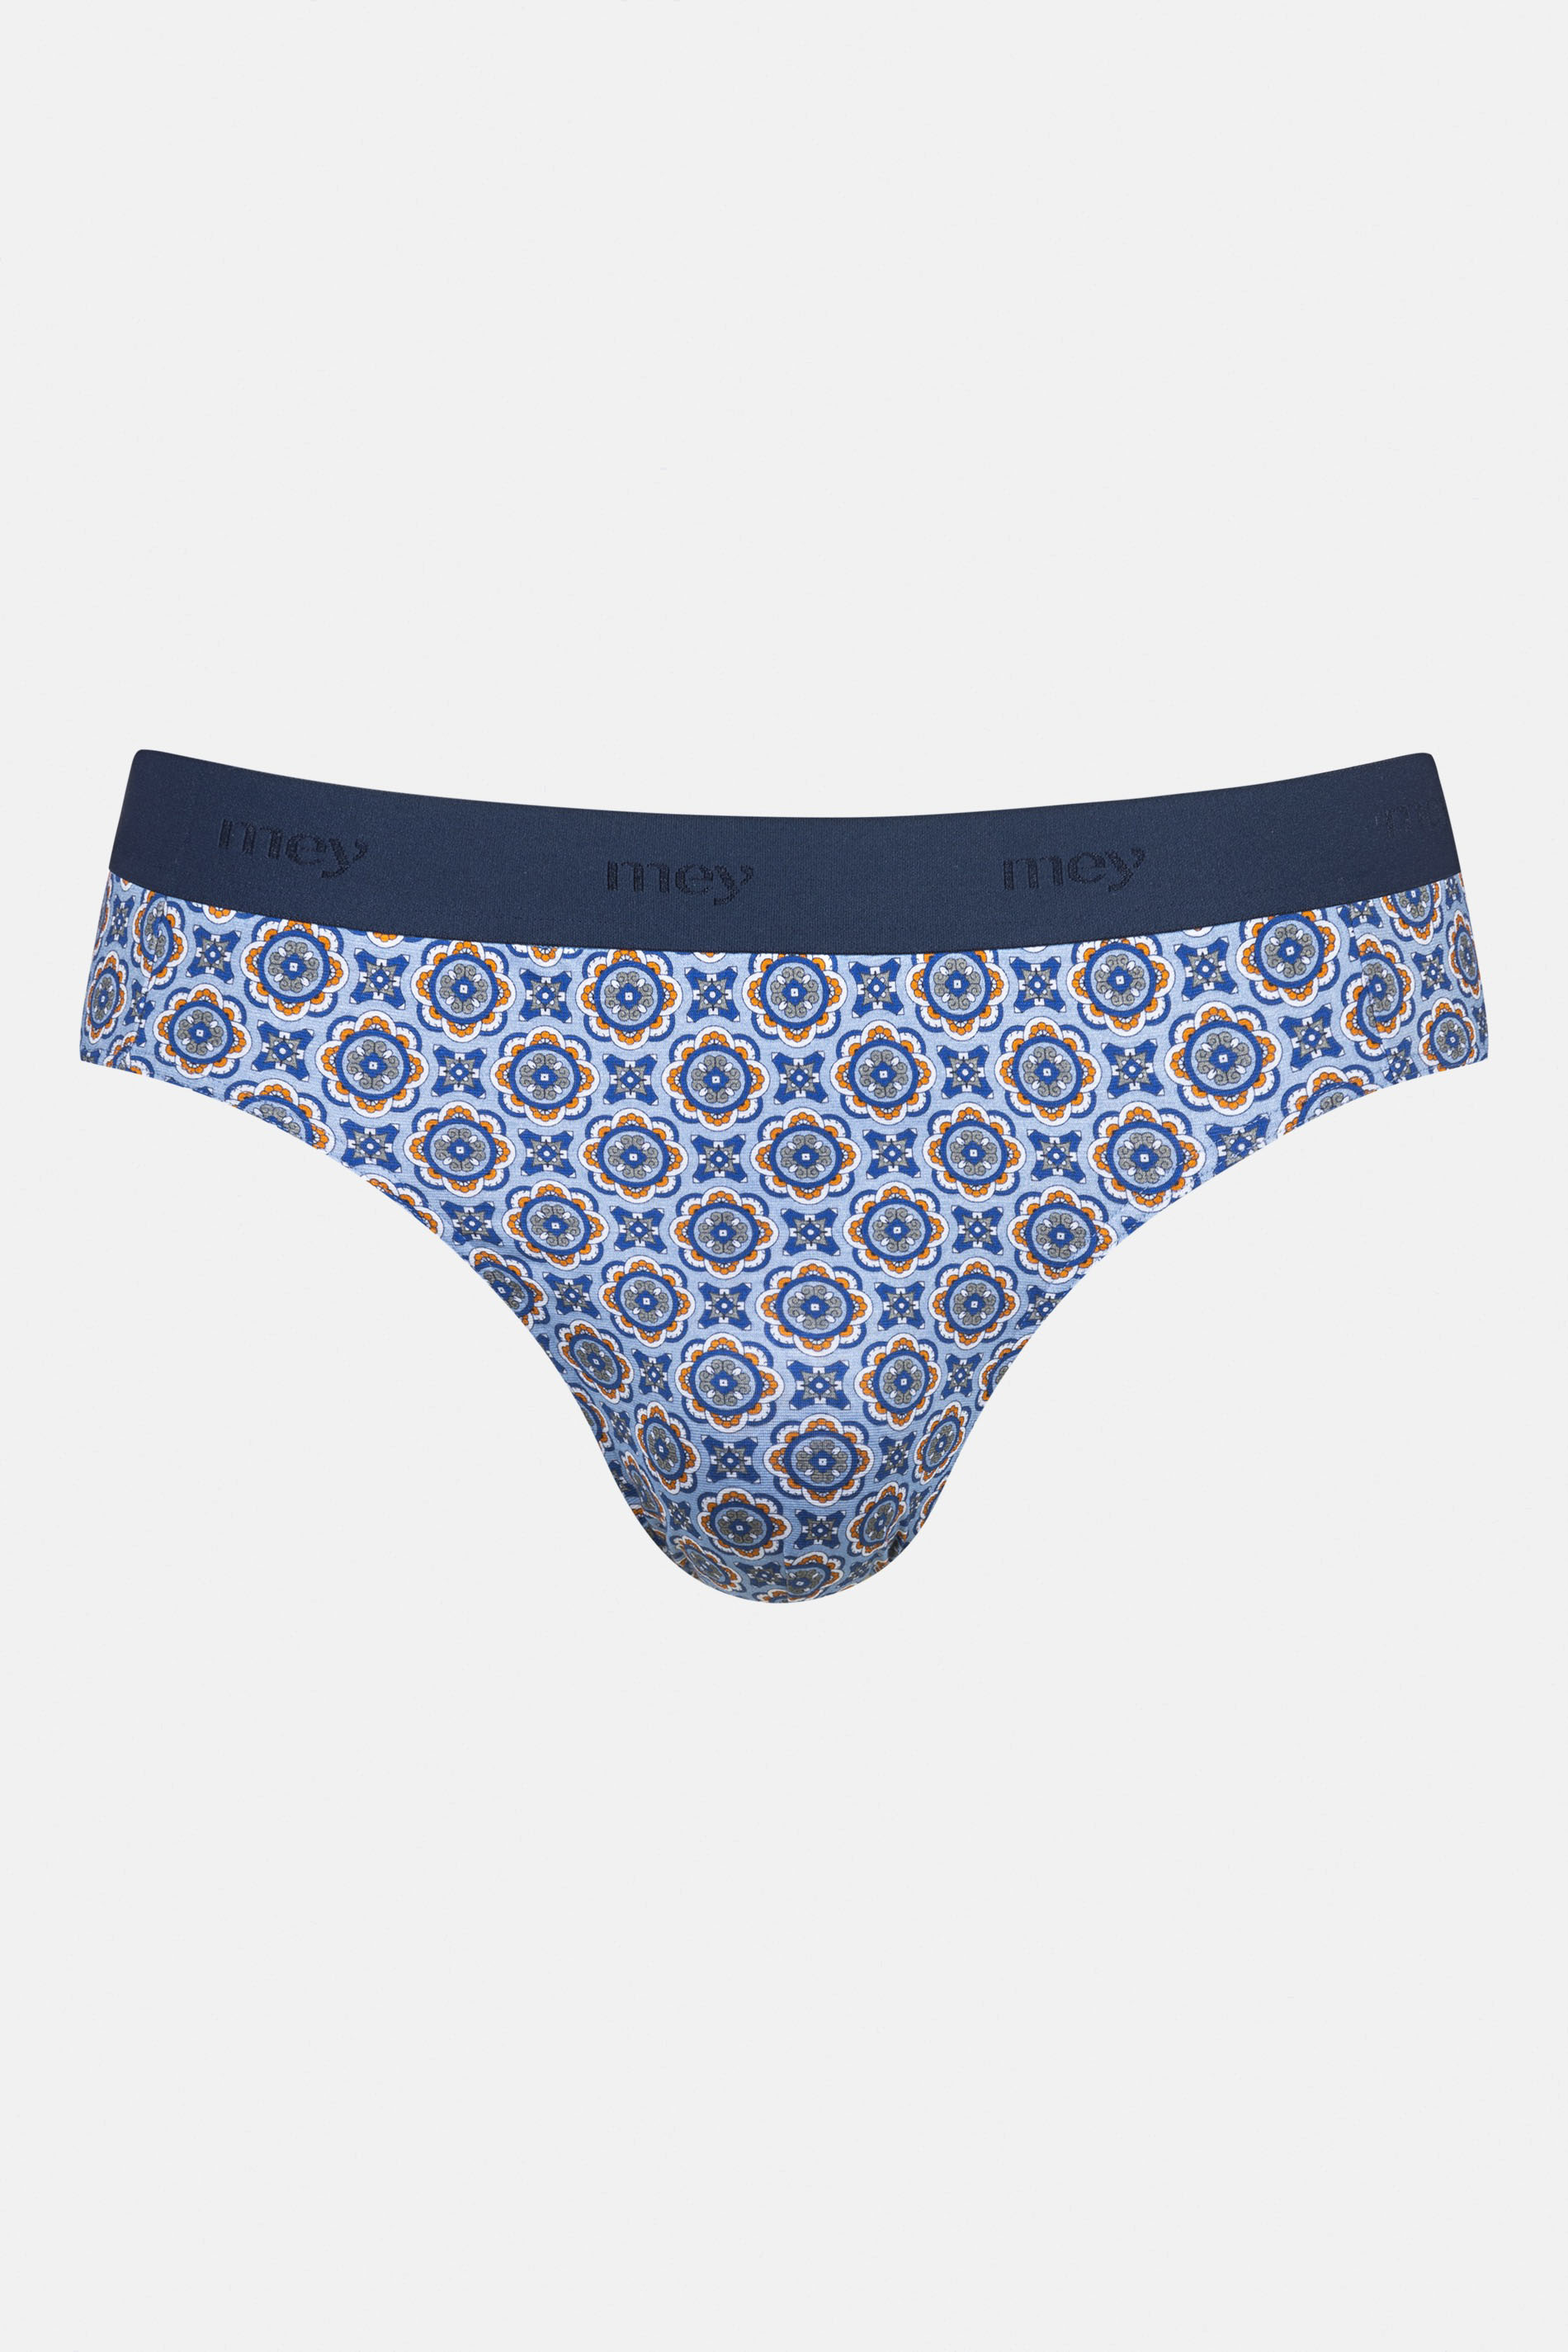 Jazz-pants Serie Noble Ornaments Uitknippen | mey®